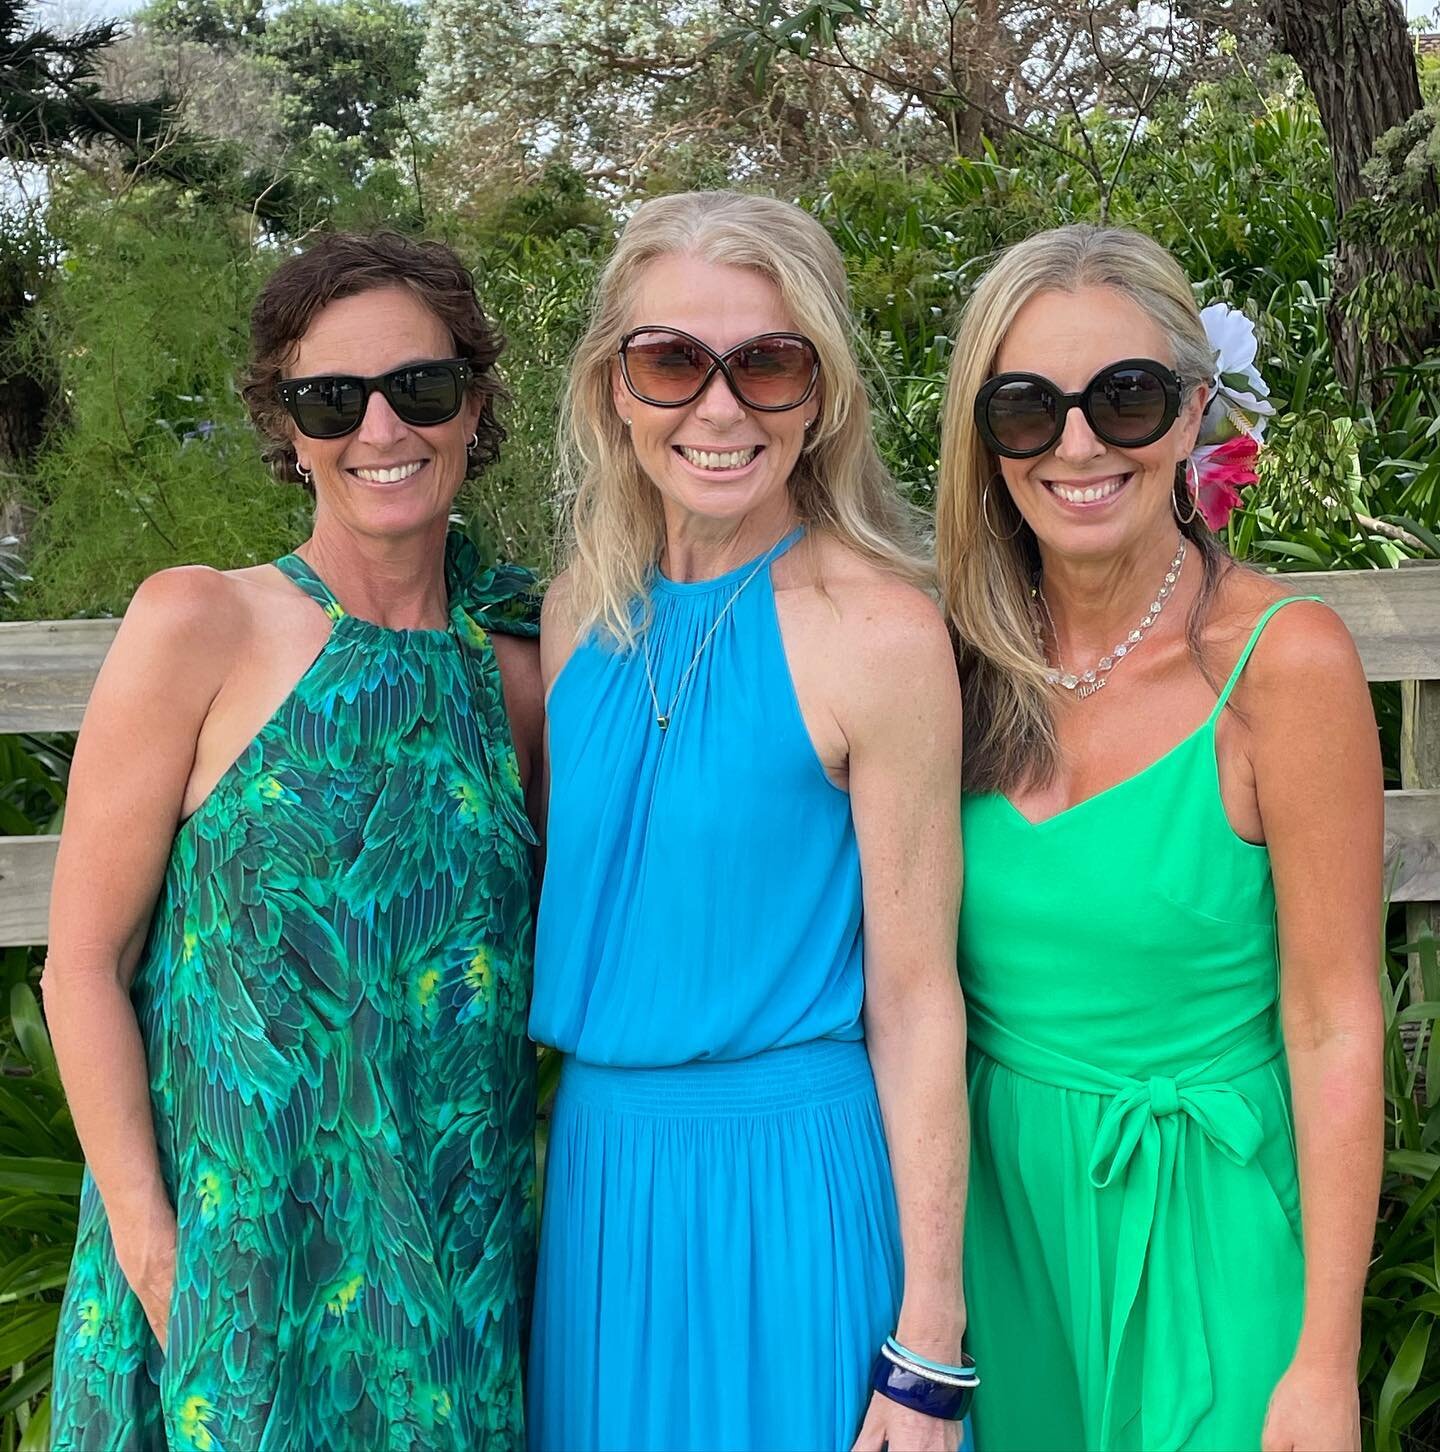 My friends Lou &amp; Brad got married this weekend on the beautiful Coromandel Peninsular- we were all lucky to get there given the damage to the land &amp; roads recently&hellip; The girls &amp; I all showed up colour coordinated in shades of aqua &